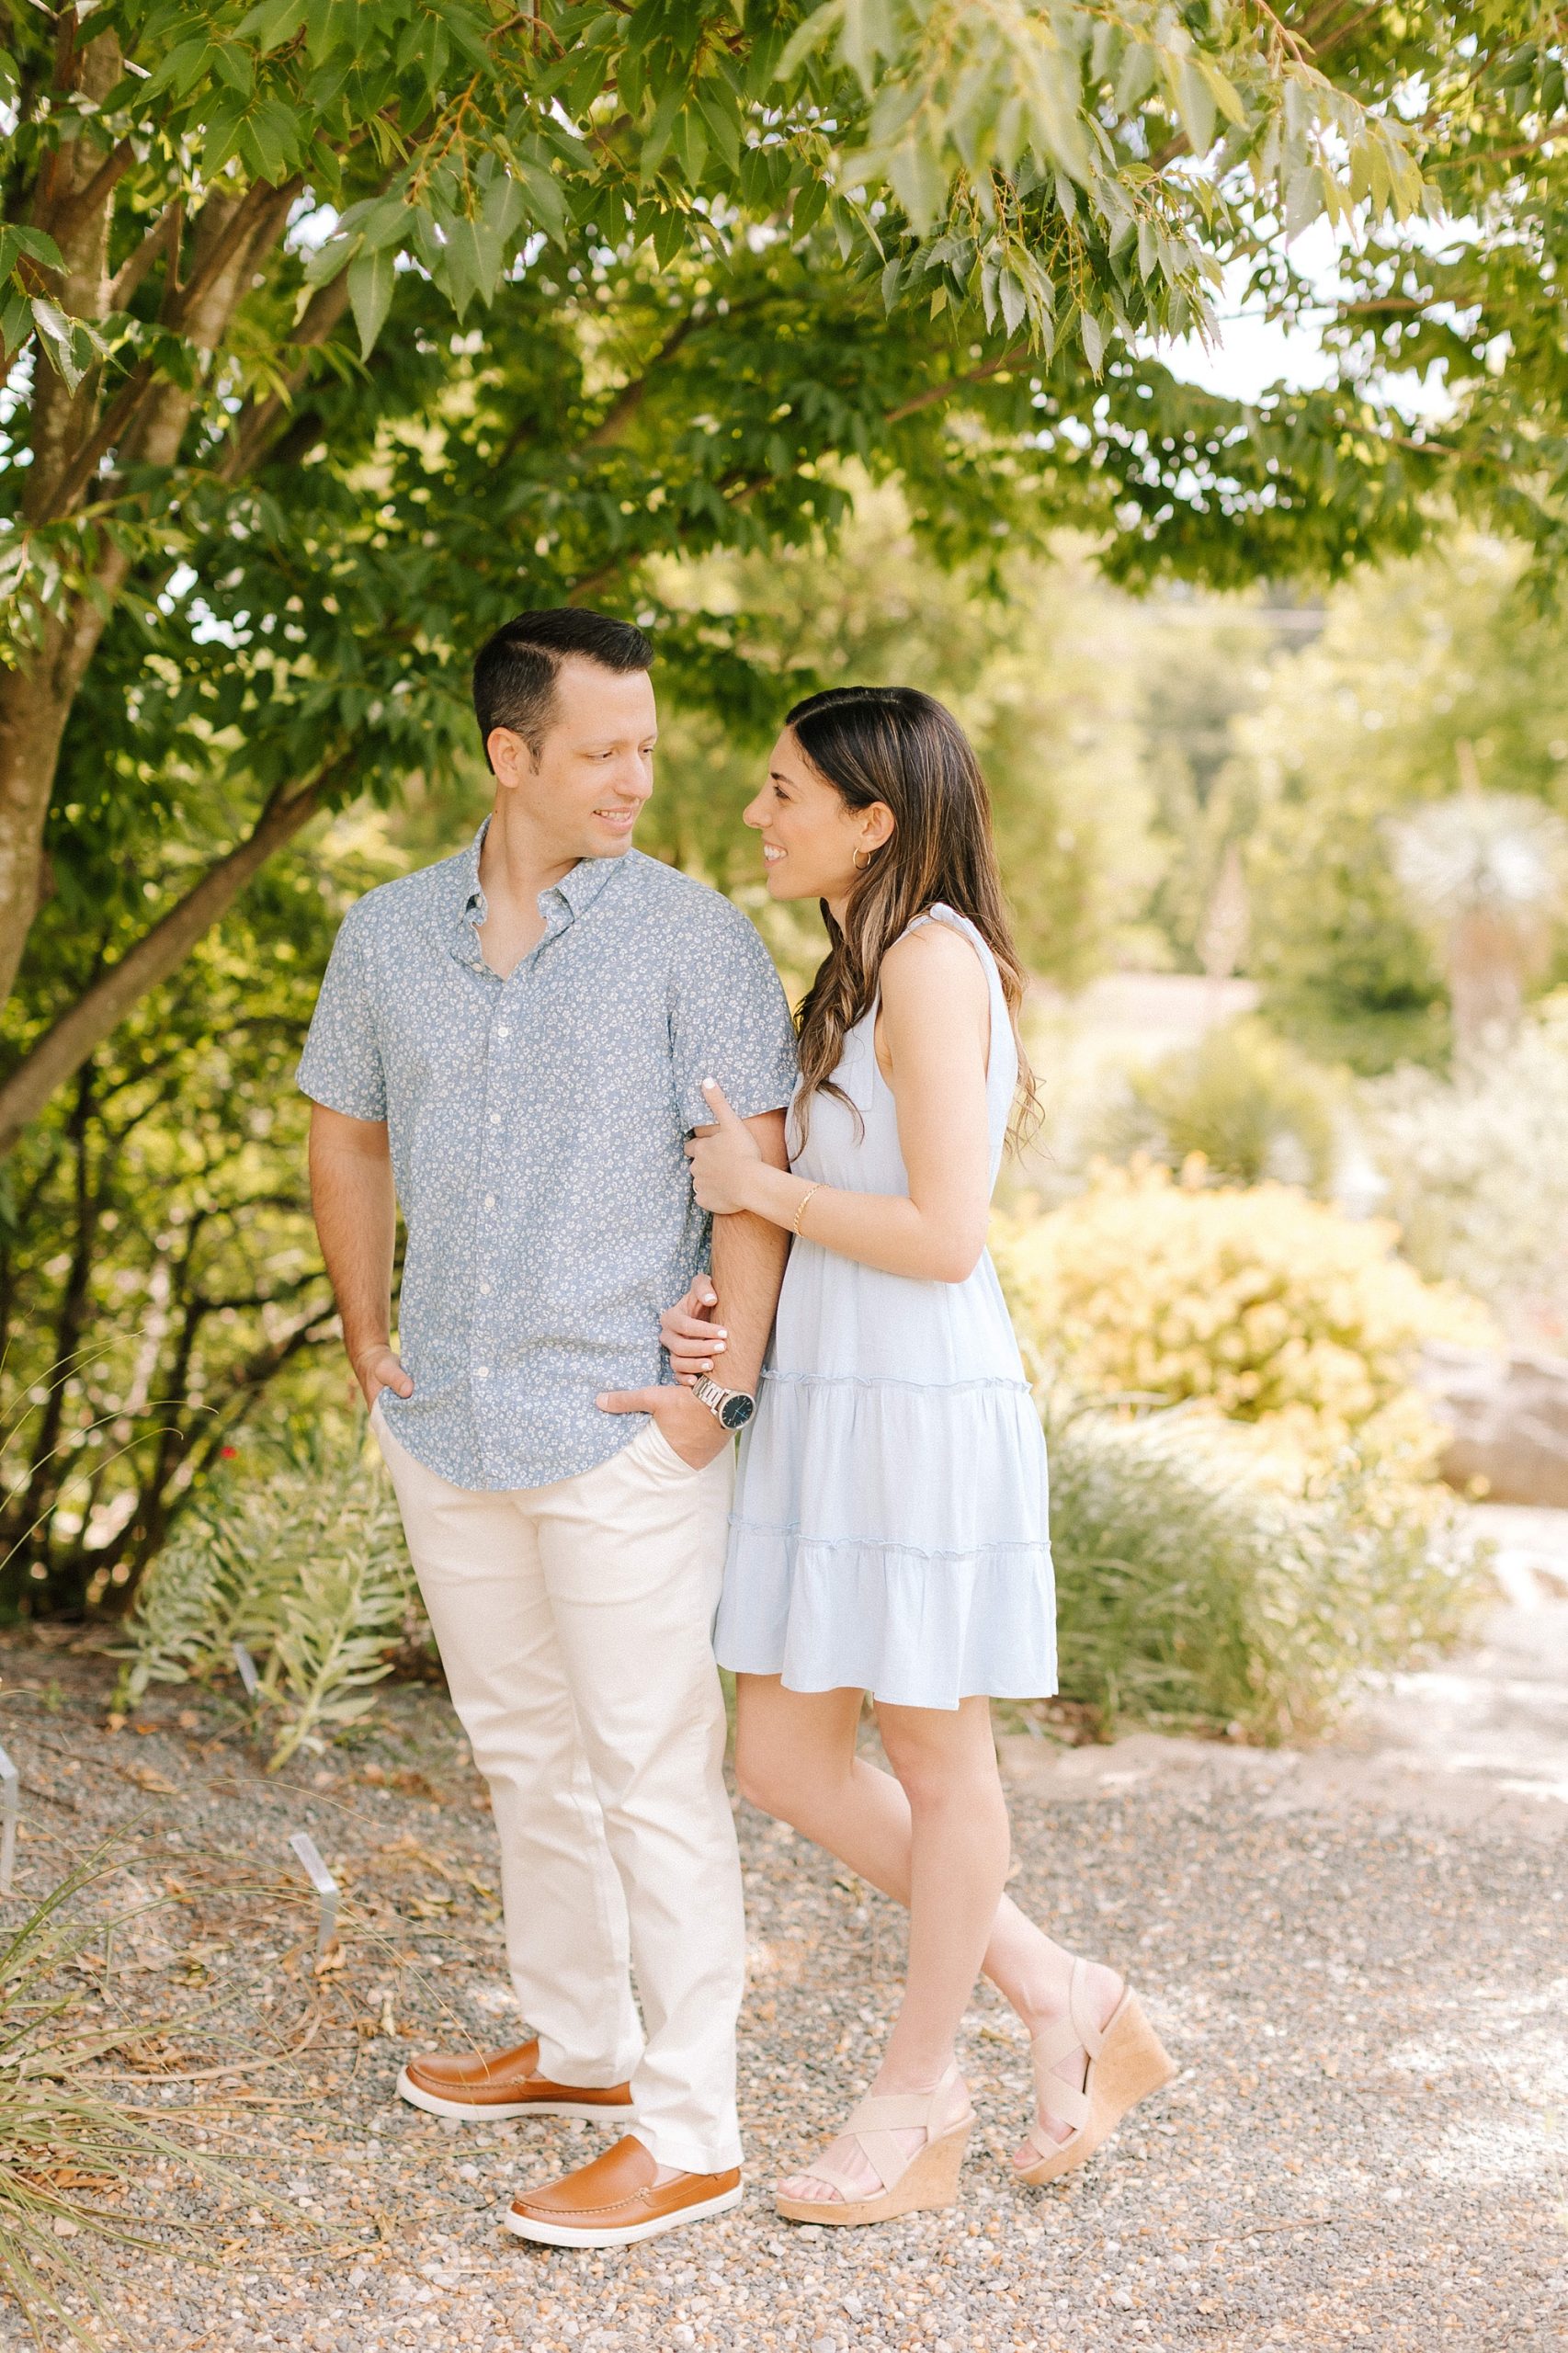 brie and groom pose in garden during JC Raulston Arboretum engagement photos